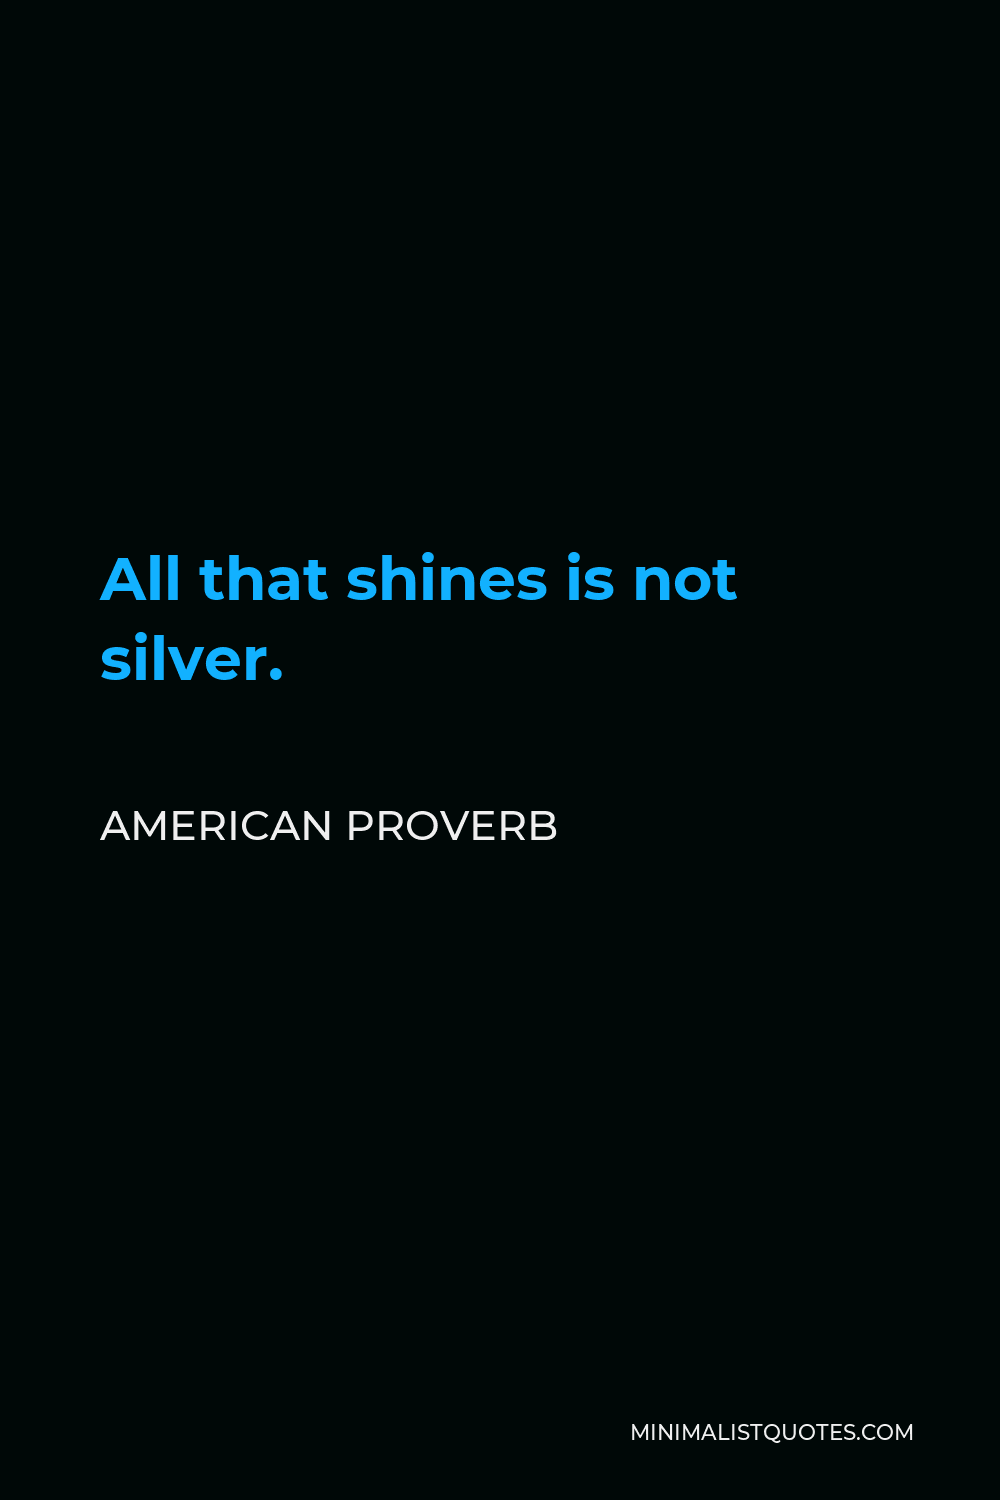 American Proverb Quote - All that shines is not silver.